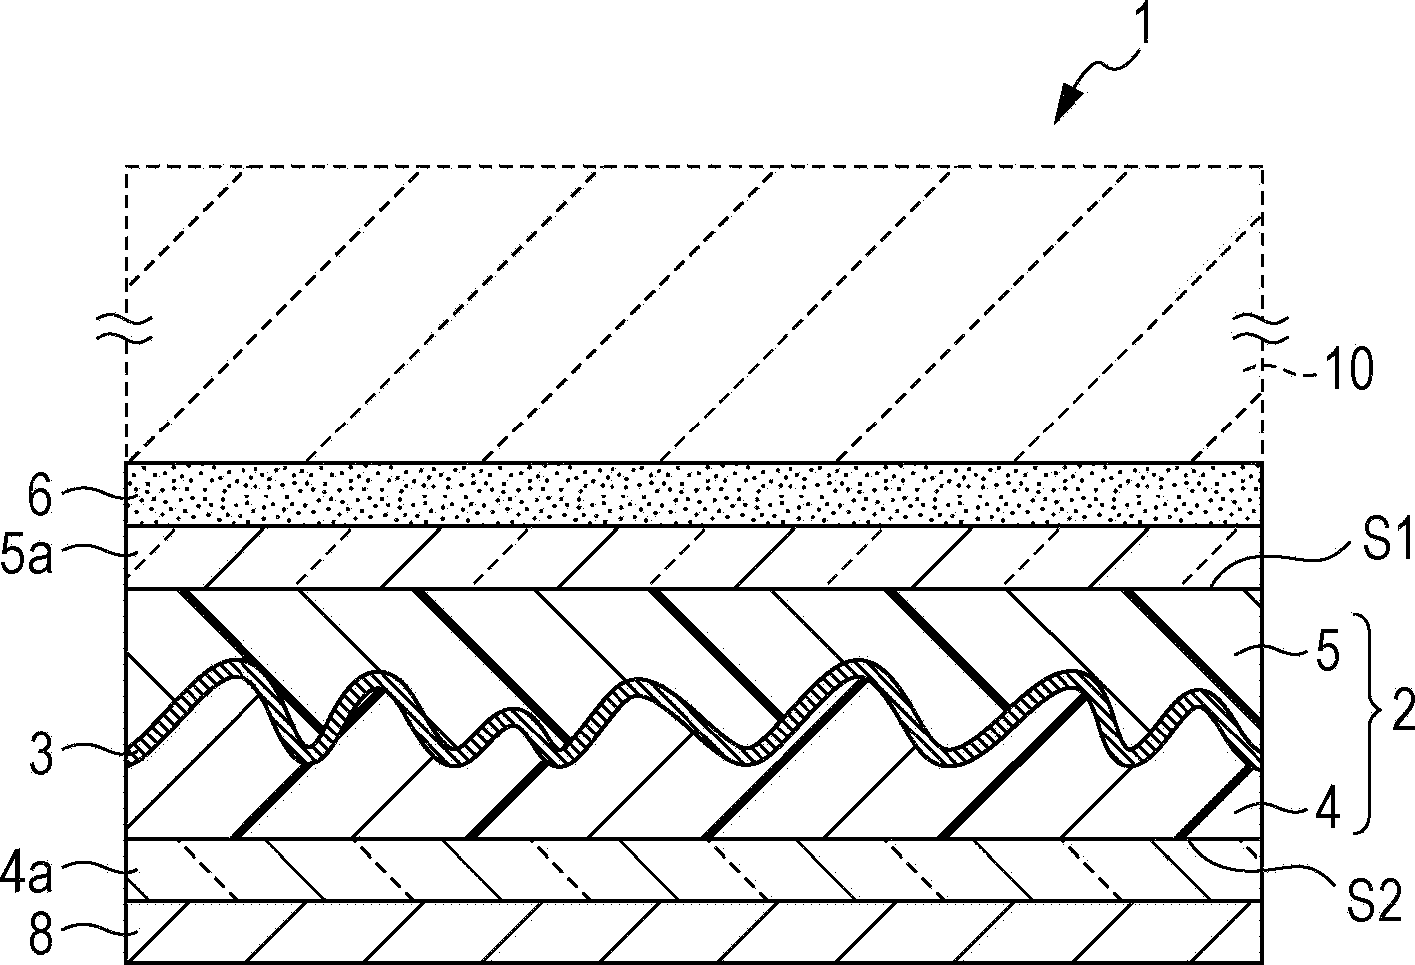 Optical body, wall member, building fitting, and solar shading device